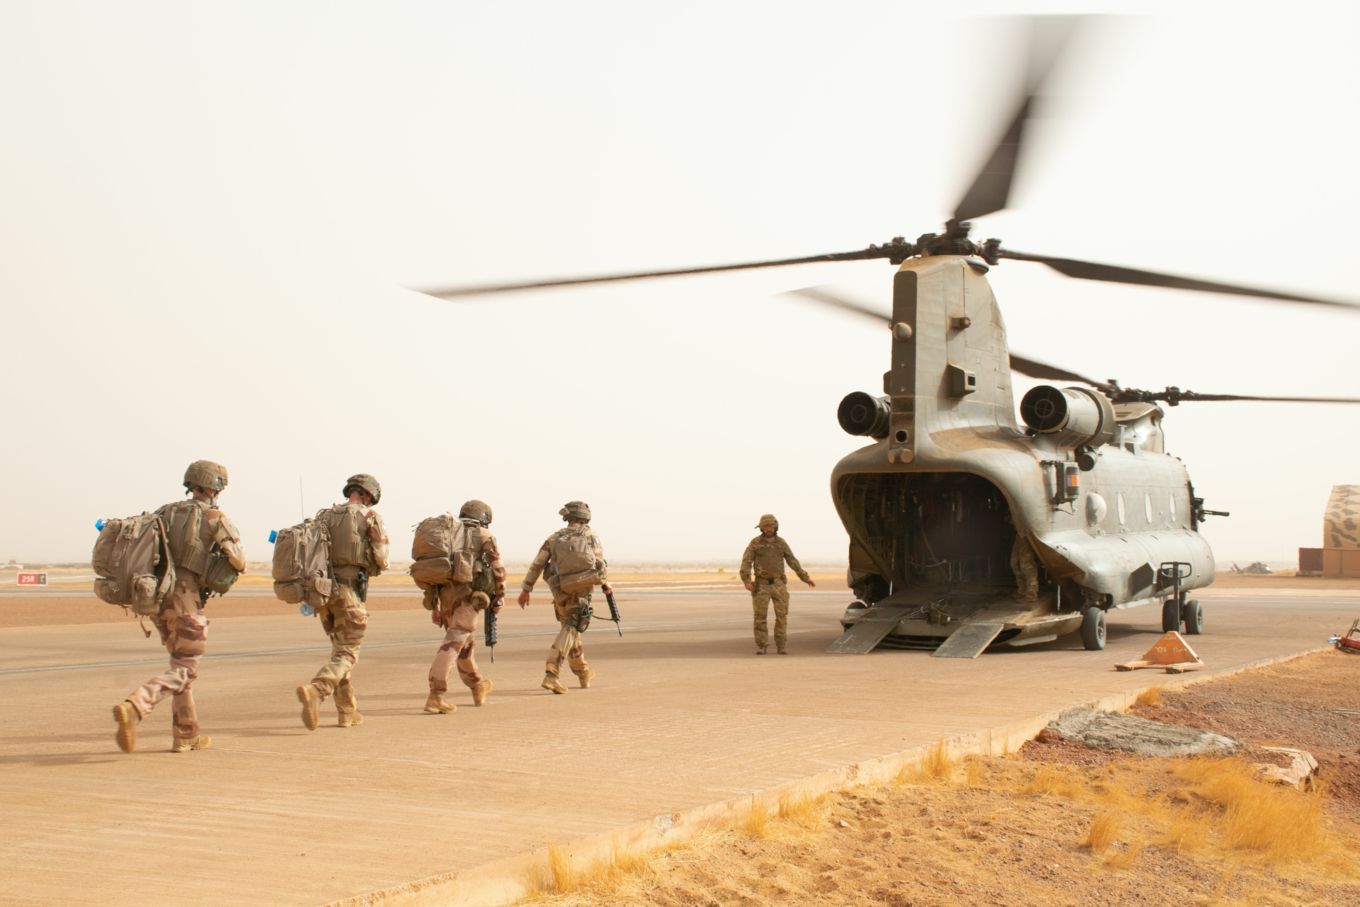 French troops embark onto a RAF Chinook helicopter in Mali.